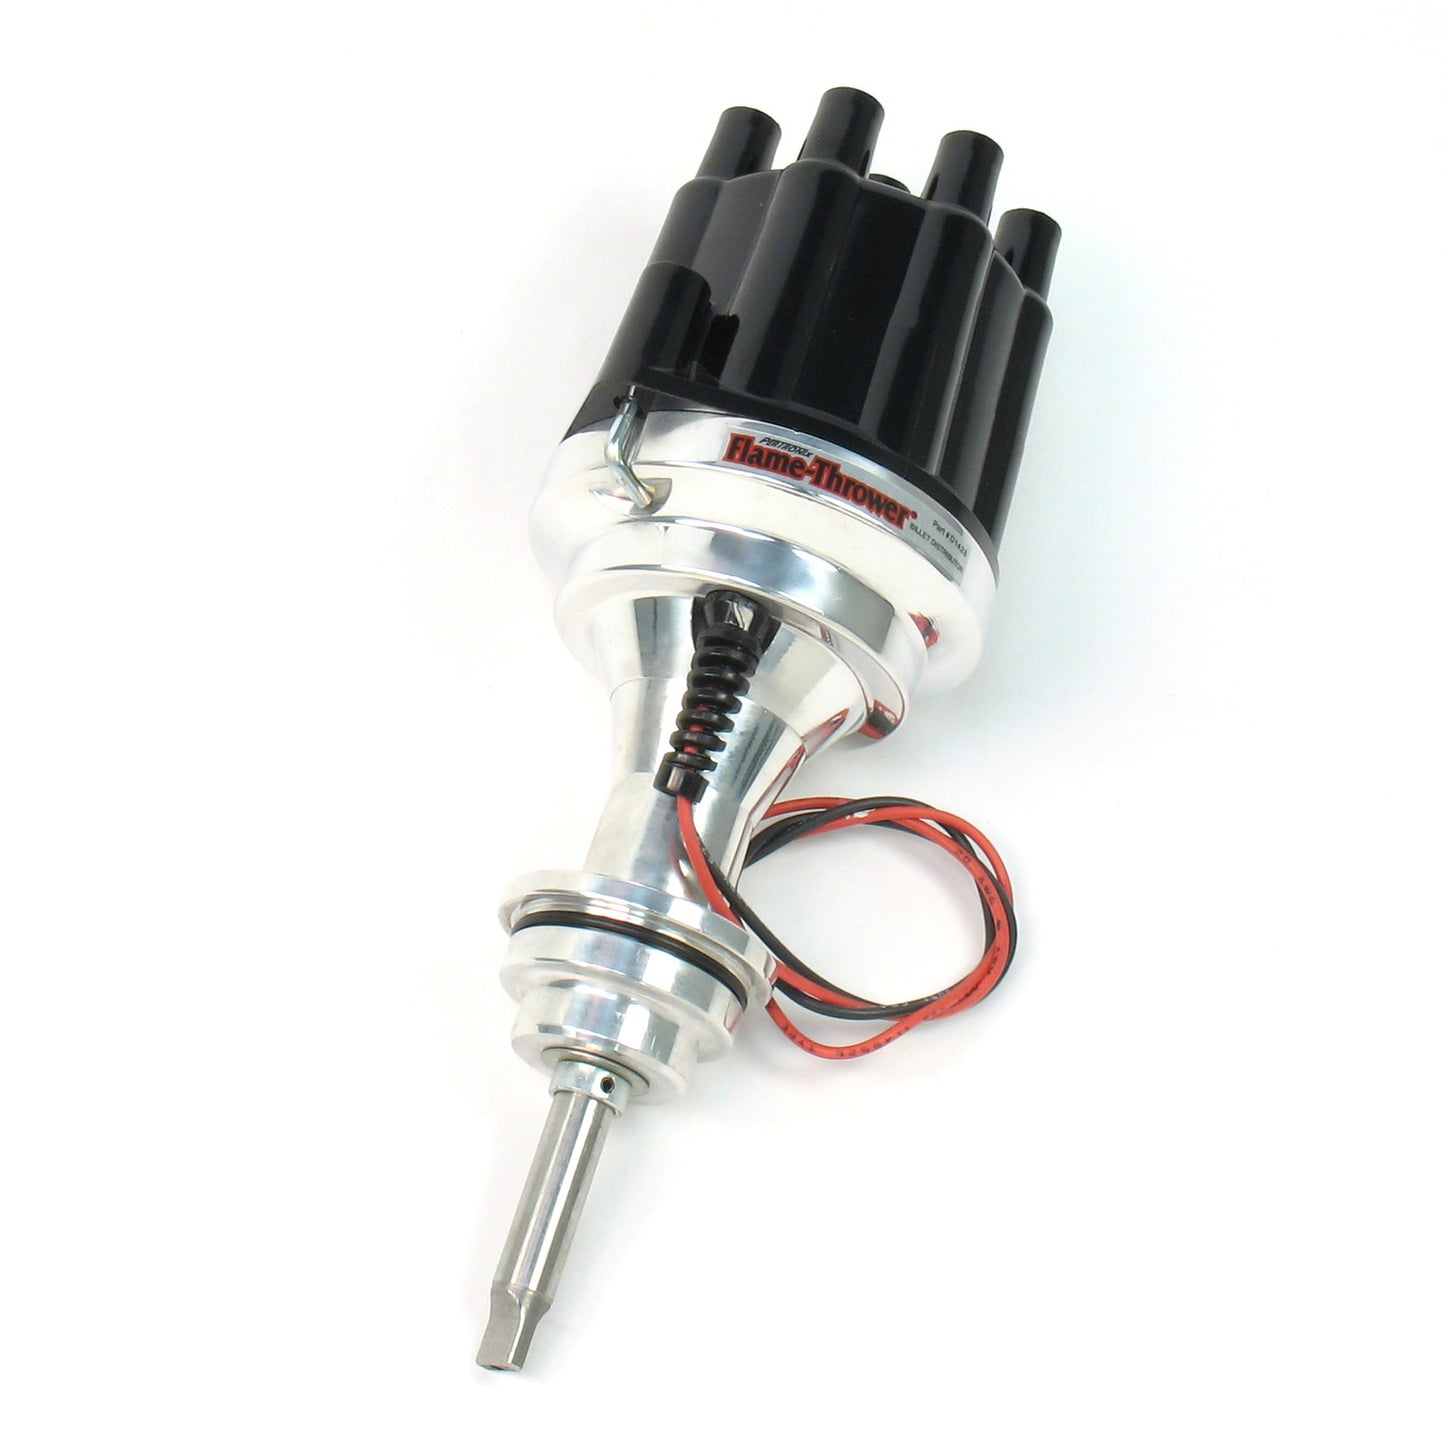 PerTronix D7142800 Flame-Thrower Electronic Distributor Billet Chrysler/Dodge/Plymouth 383-400 with Ignitor III Non Vacuum Black Cap